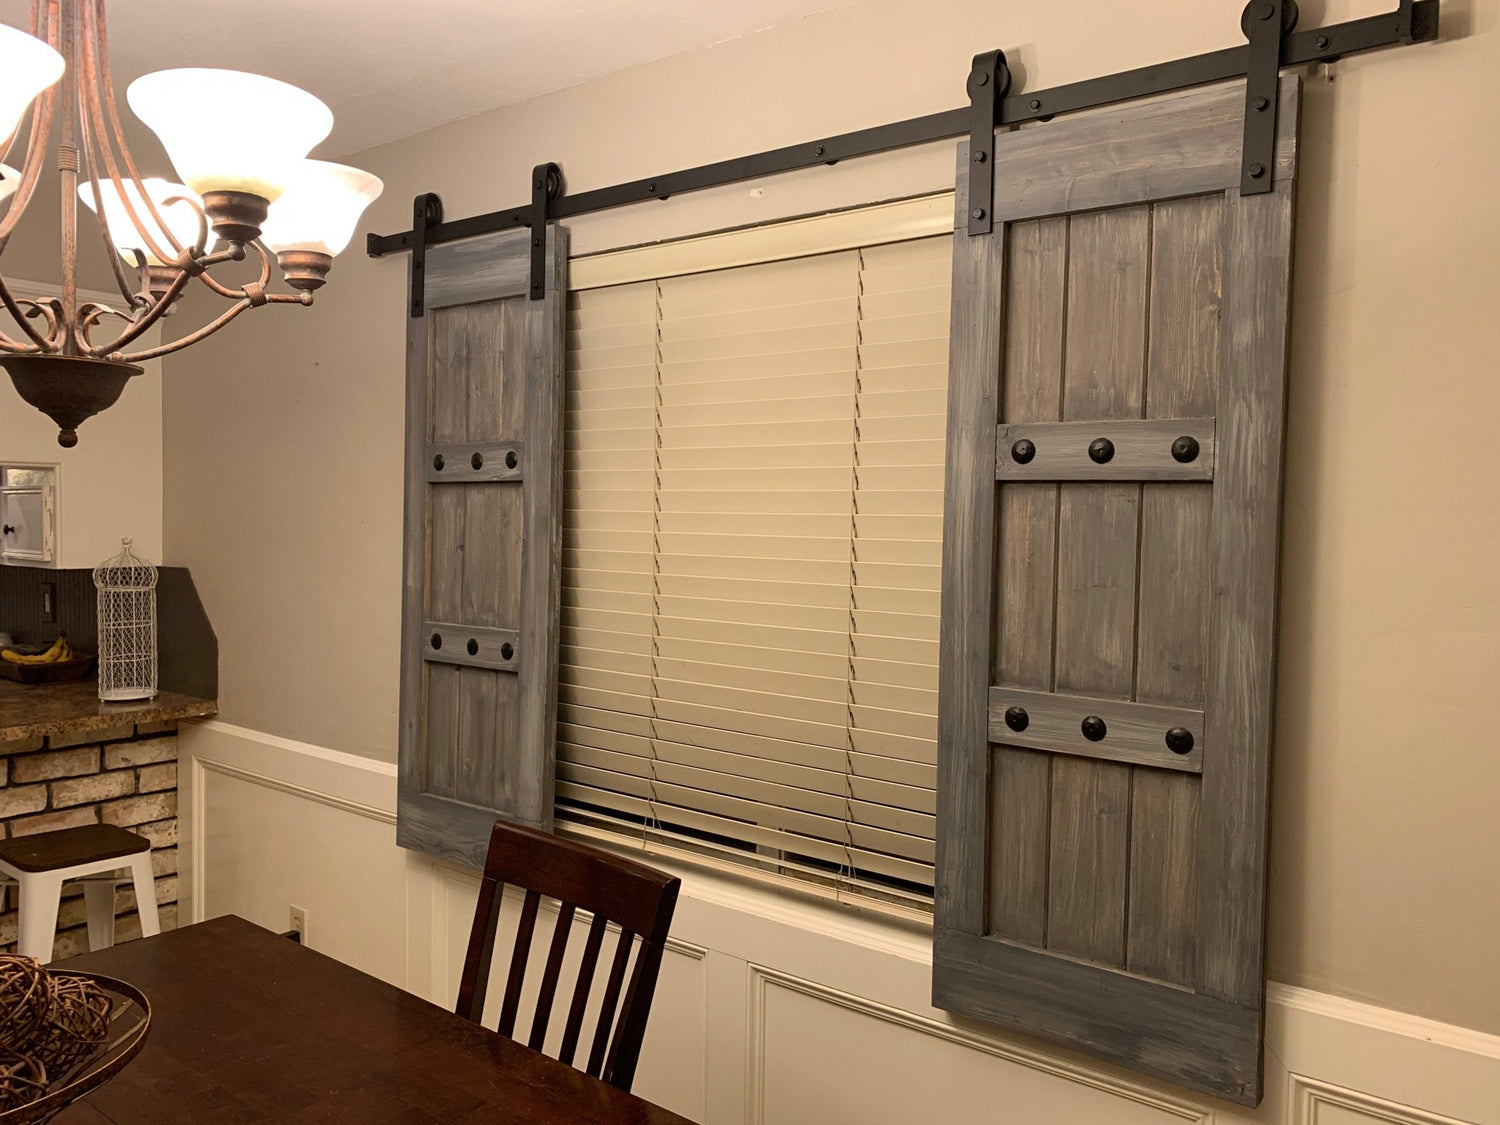 Dining room window featuring wooden barn shutters